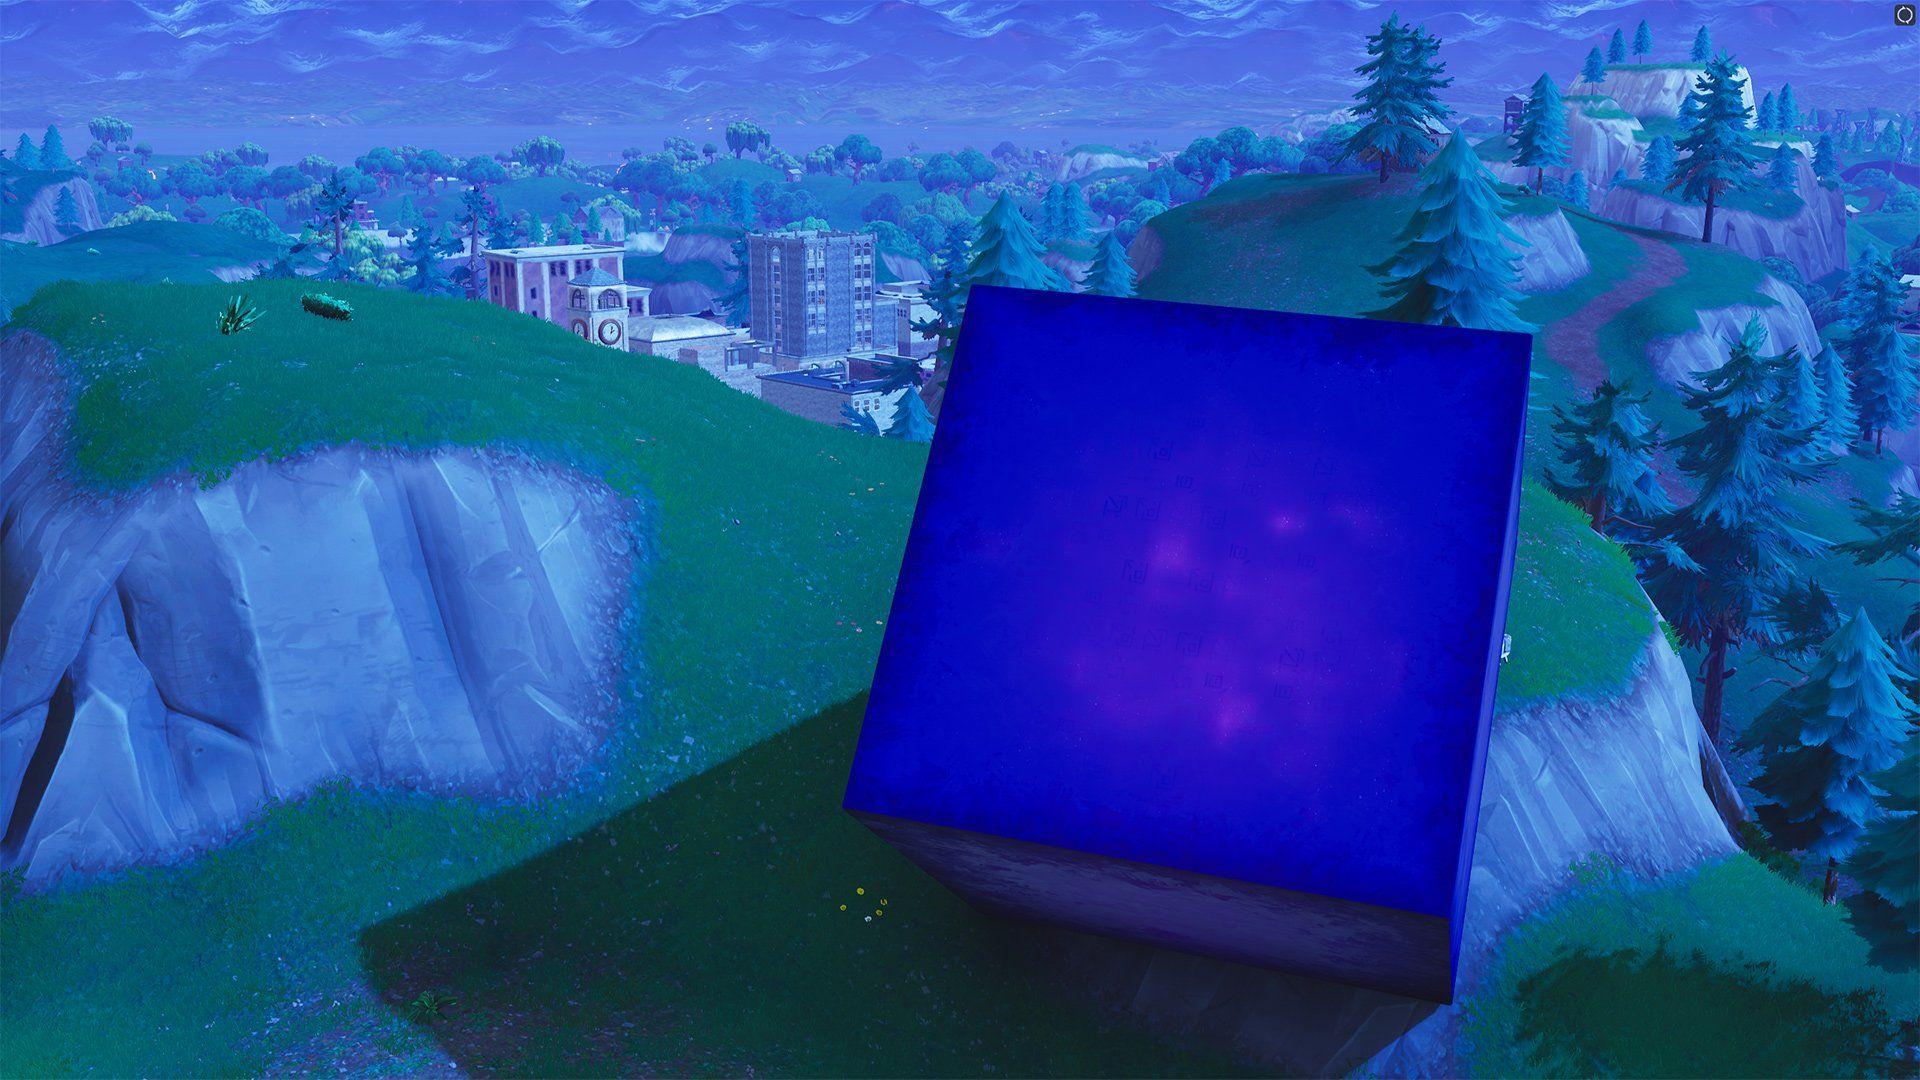 Mystery of giant purple cube in Fortnite Battle Royale 'solved'